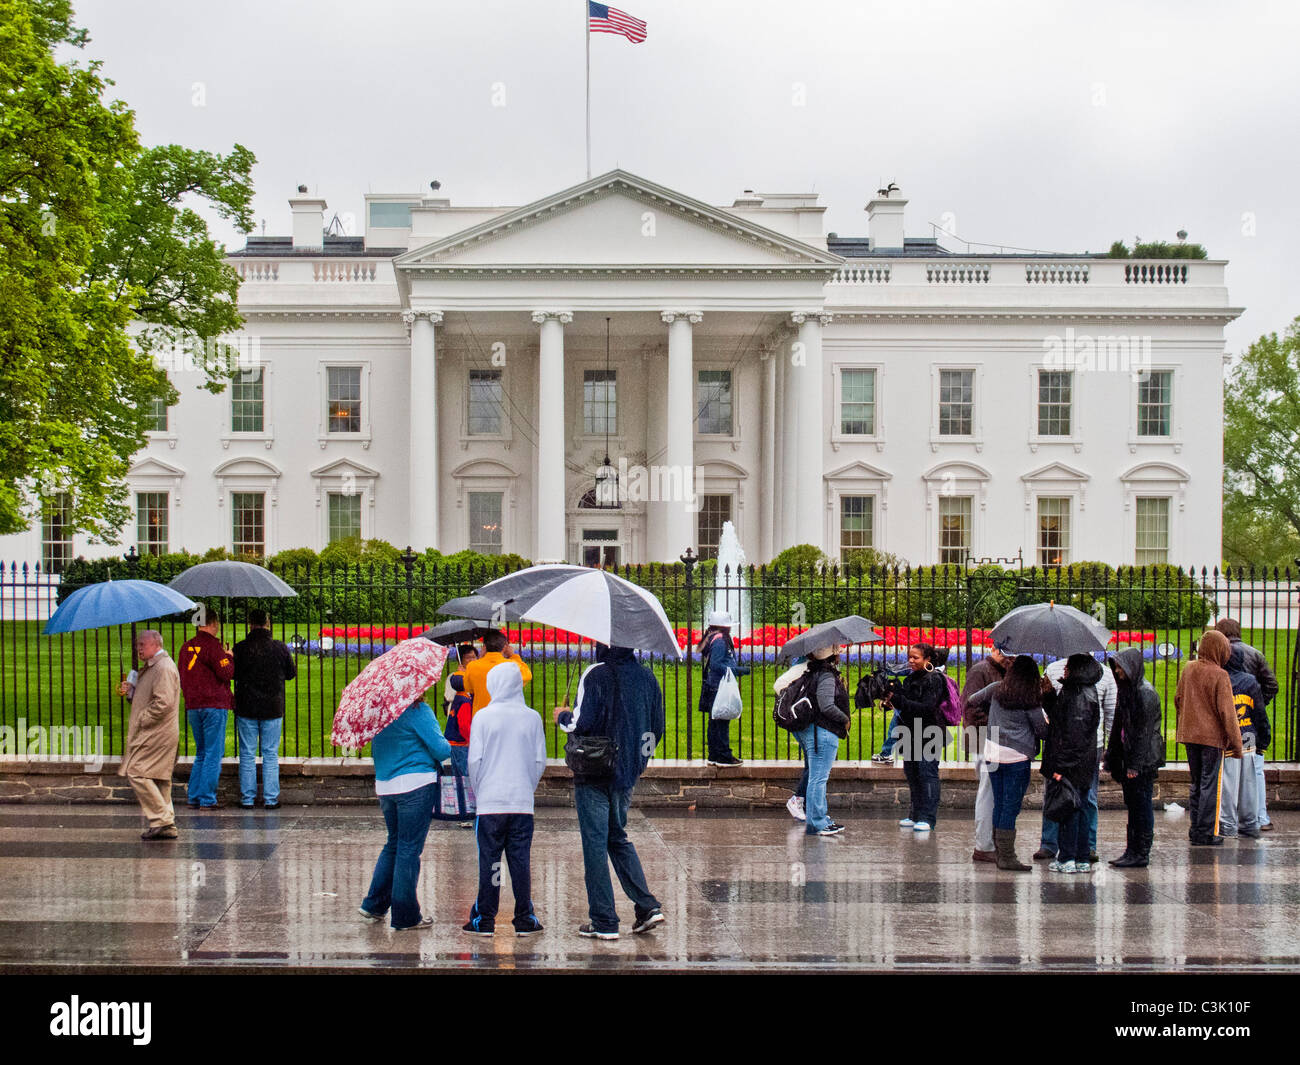 Wearing raincoats and carrying umbrellas, tourists gather outside the White House in Washington, D.C. Stock Photo